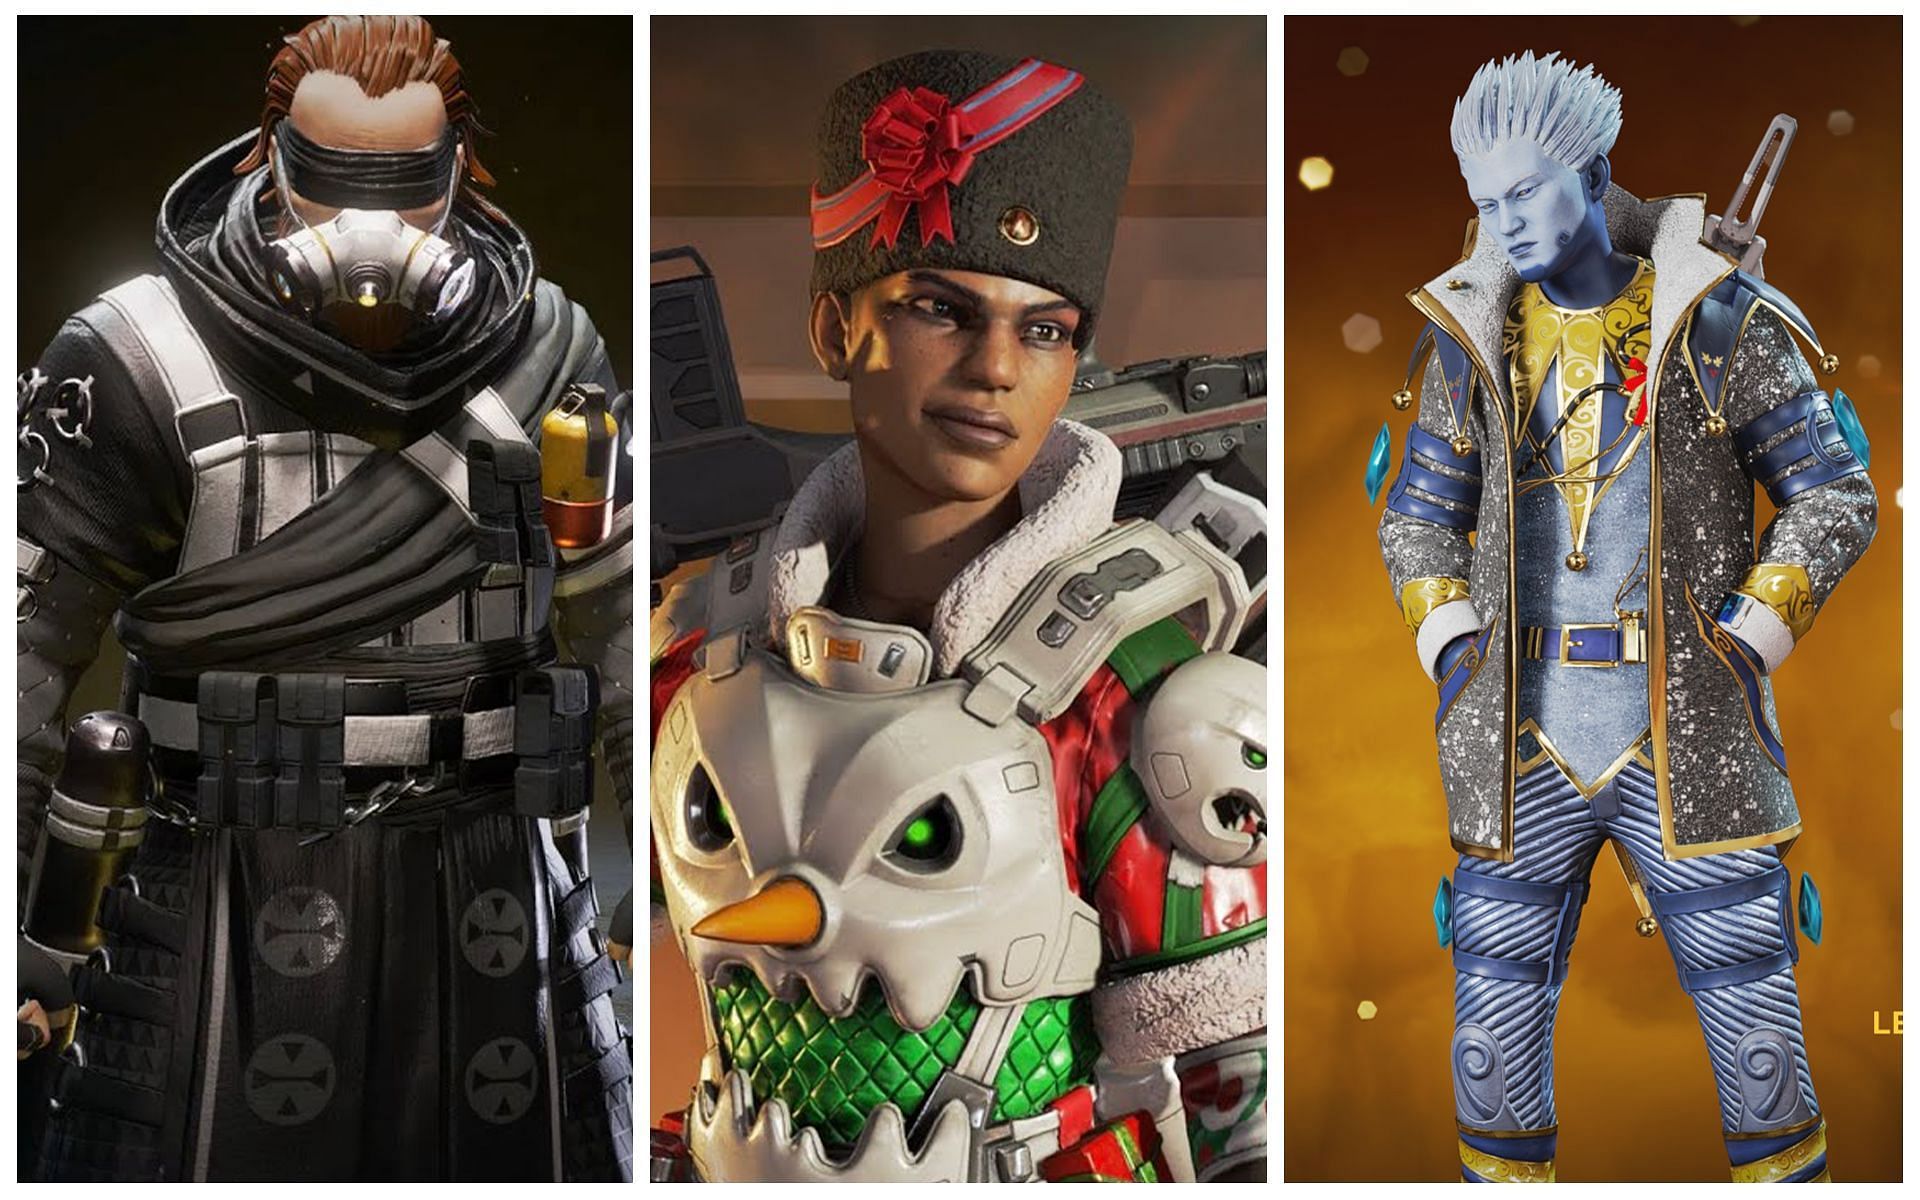 Some of the rarest skins in Apex Legends (Image by Sportskeeda)